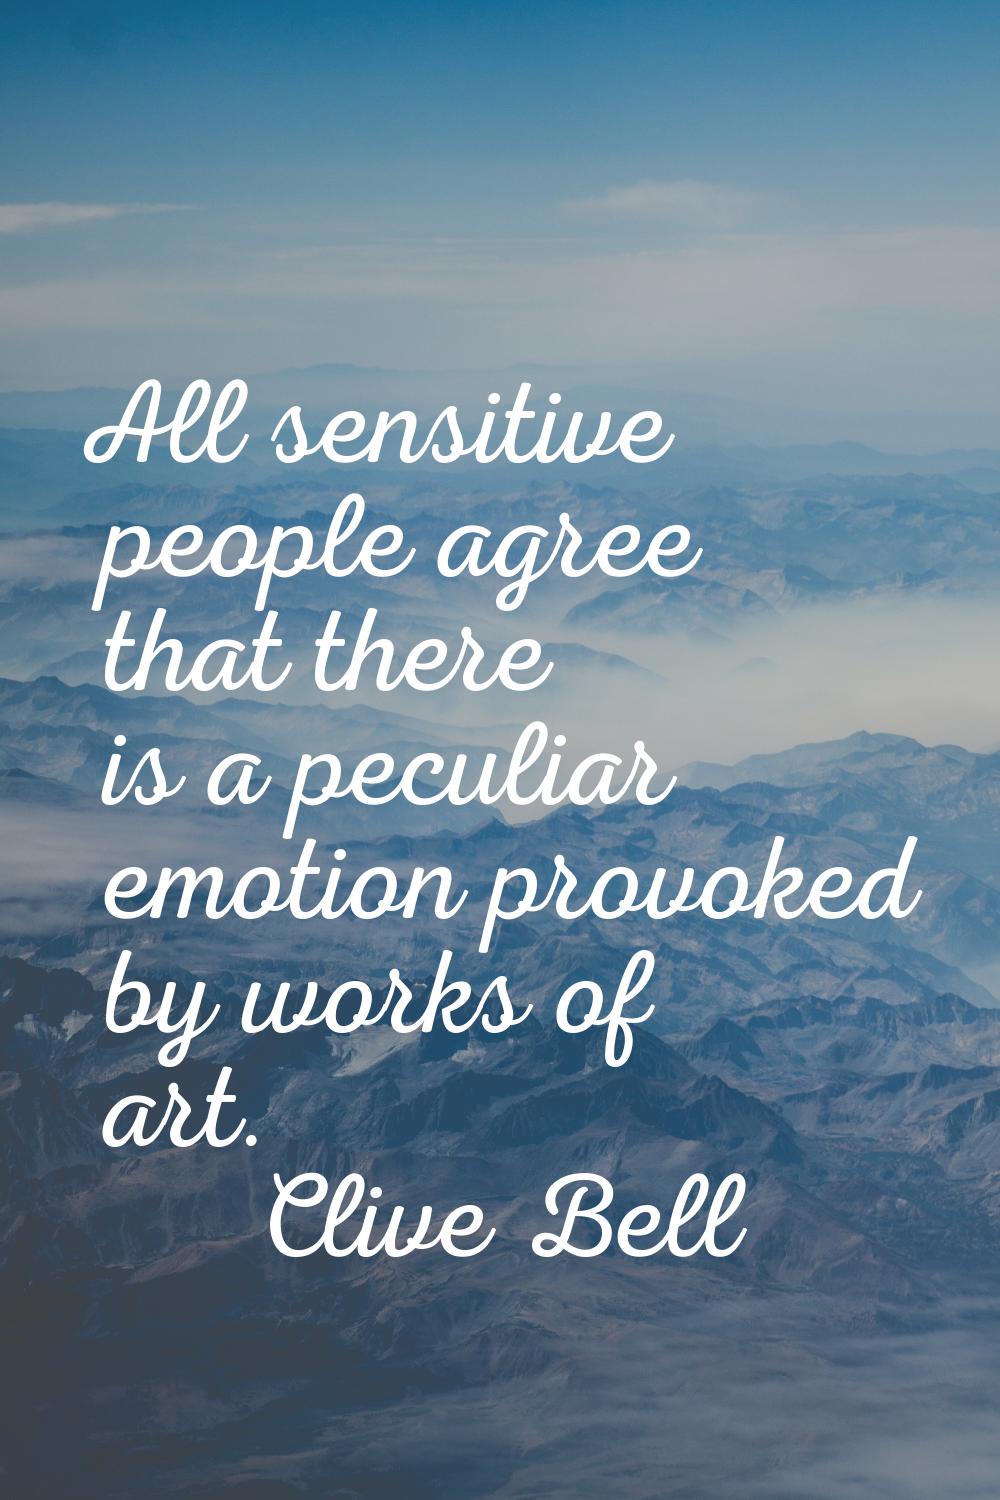 All sensitive people agree that there is a peculiar emotion provoked by works of art.